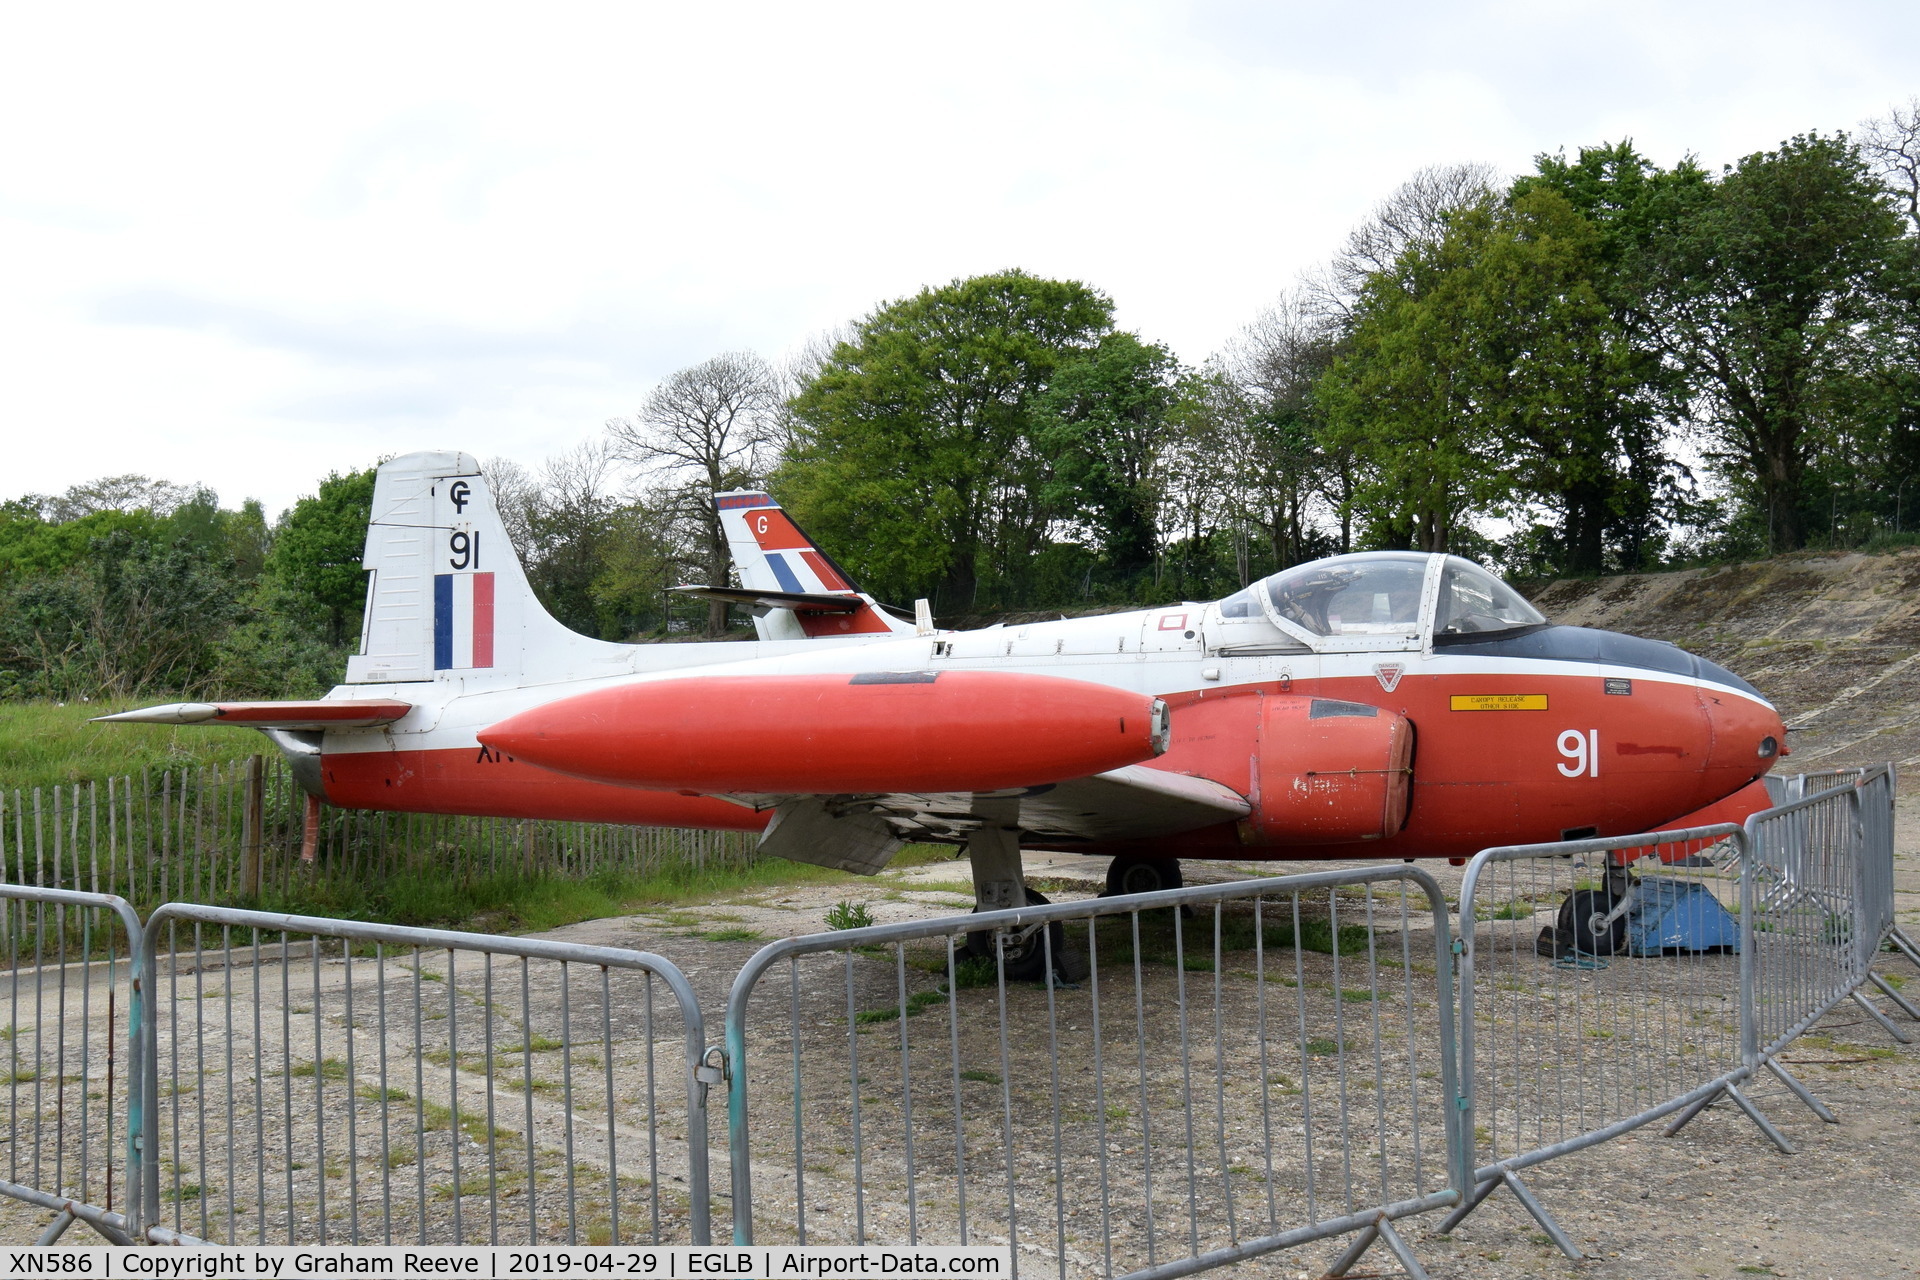 XN586, 1961 Hunting P-84 Jet Provost T.3A C/N Not found XN586, On display at the Brooklands Museum.